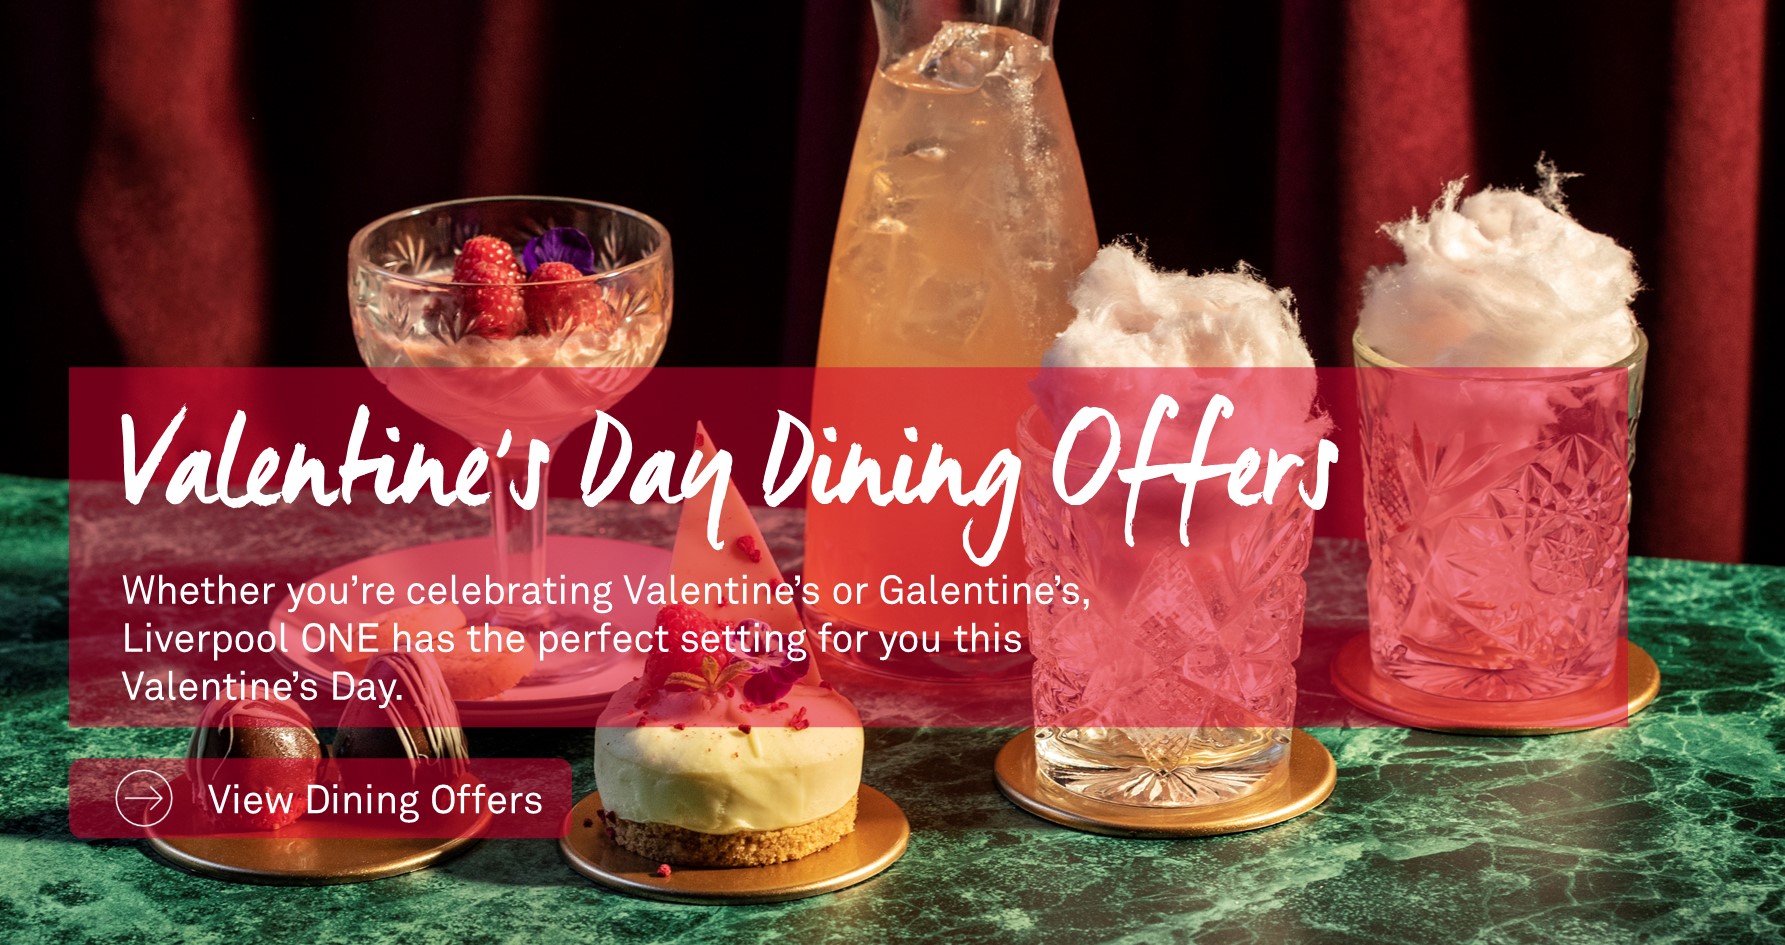 Valentines Day Dining Offers